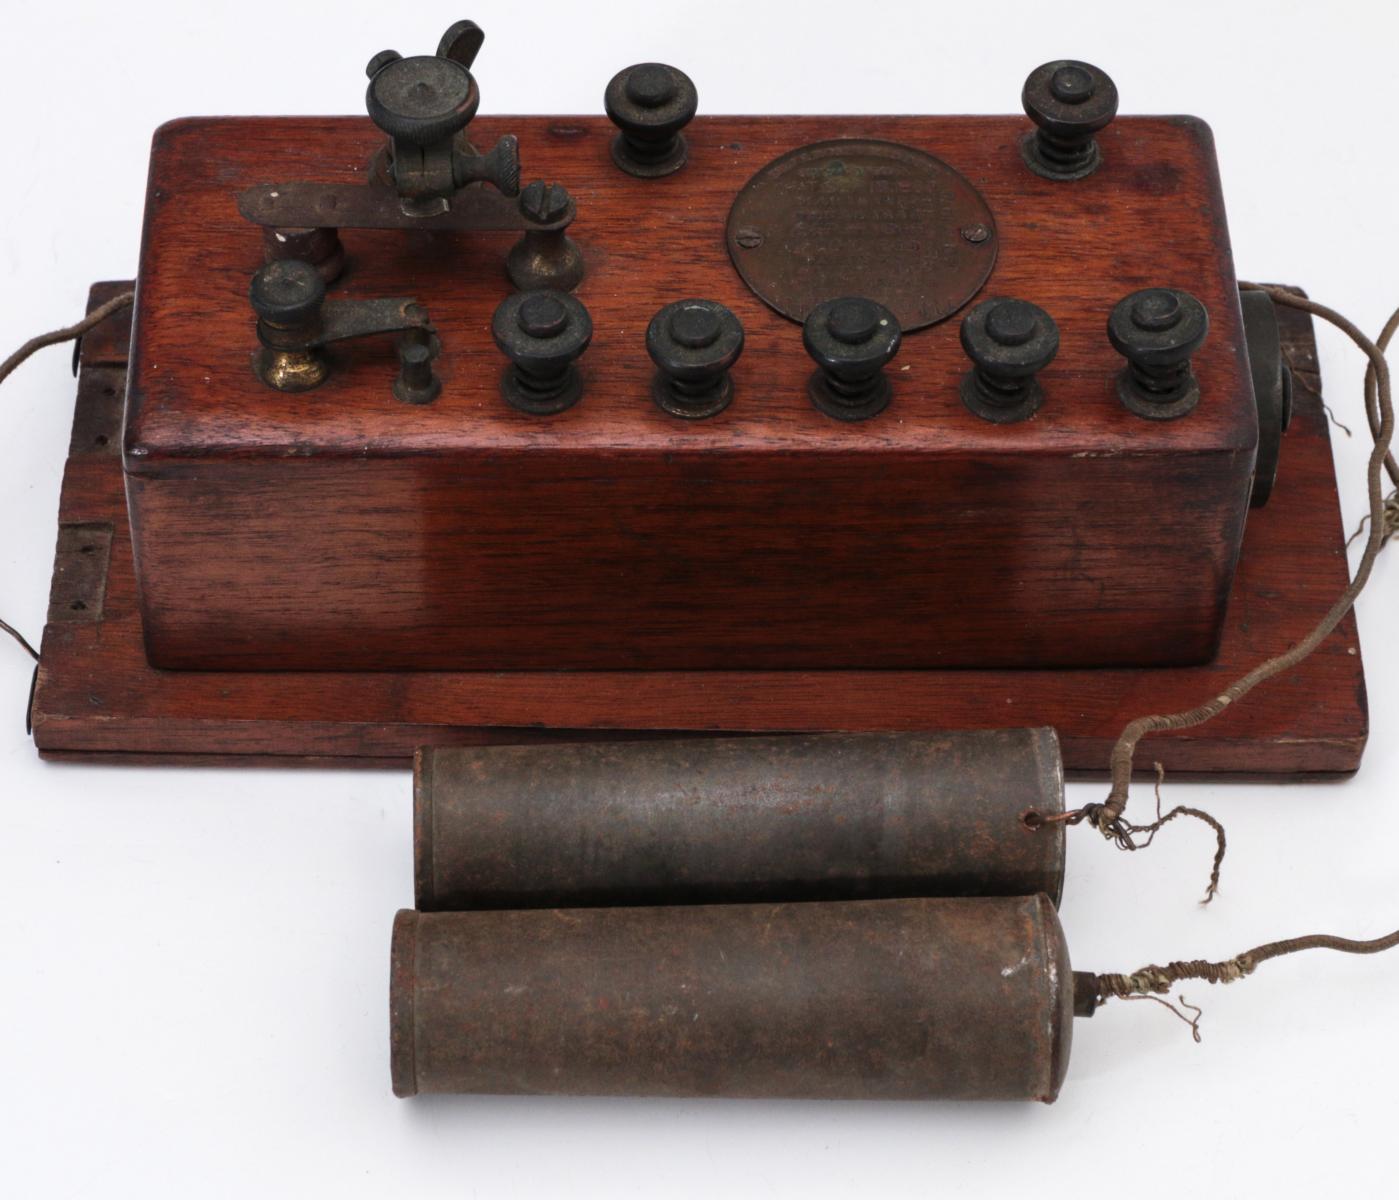 A DR. JEROME KIDDER ELECTRO THERAPY DEVICE, 1876